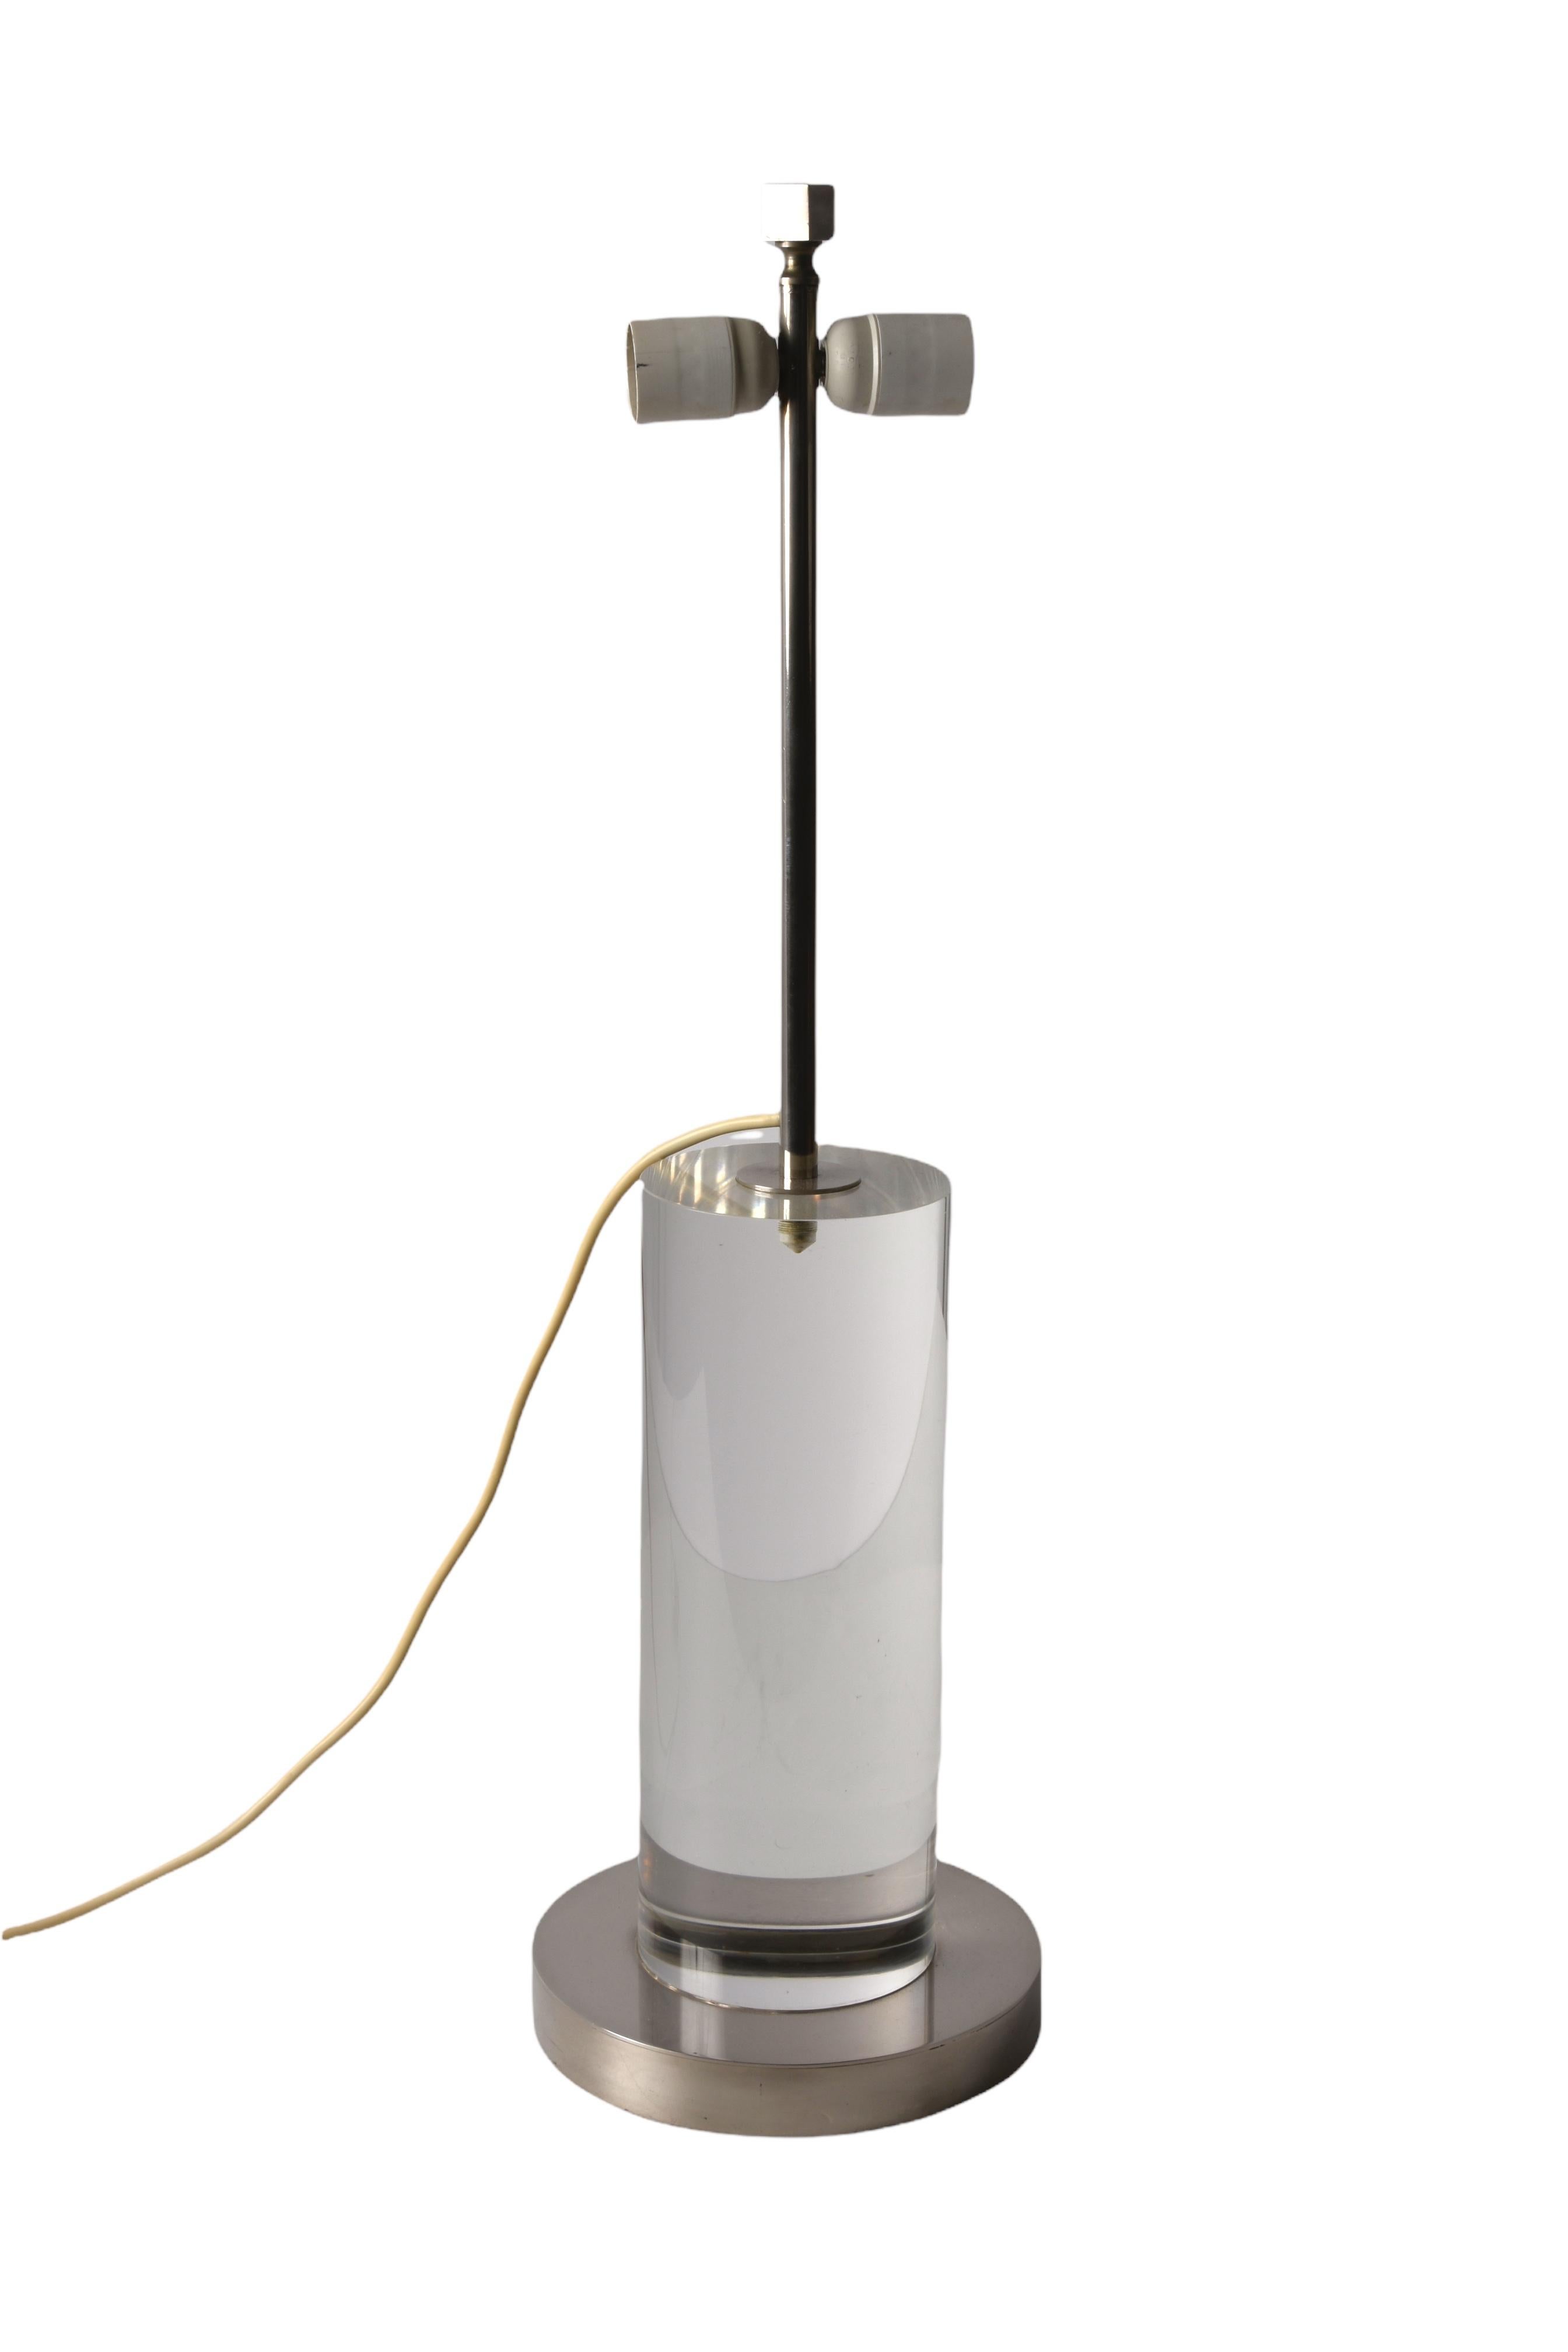 Romeo Rega Midcentury Italian Table Lamp with Lucite Column and Brass Base 1970s For Sale 15